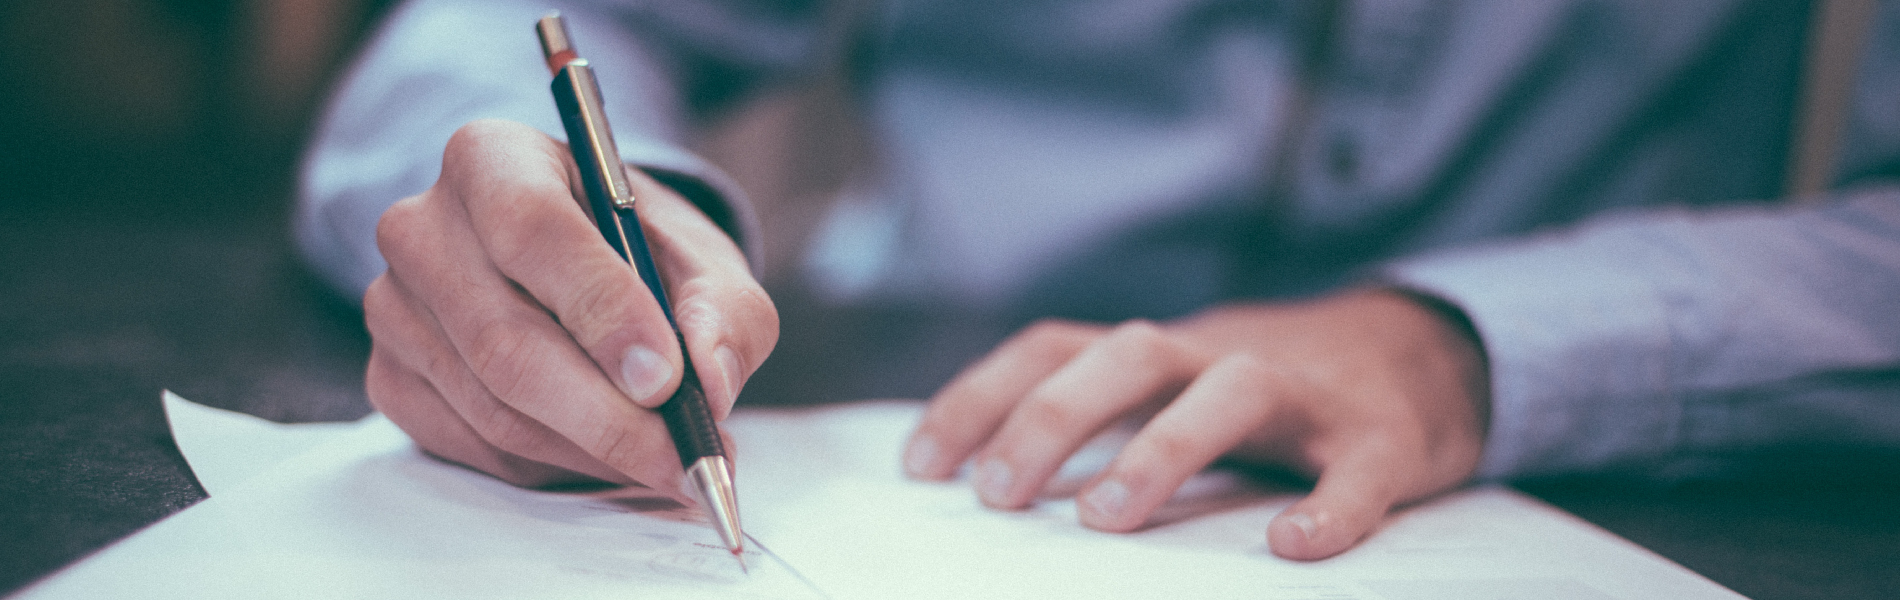 Hand holding a pen writing on a document